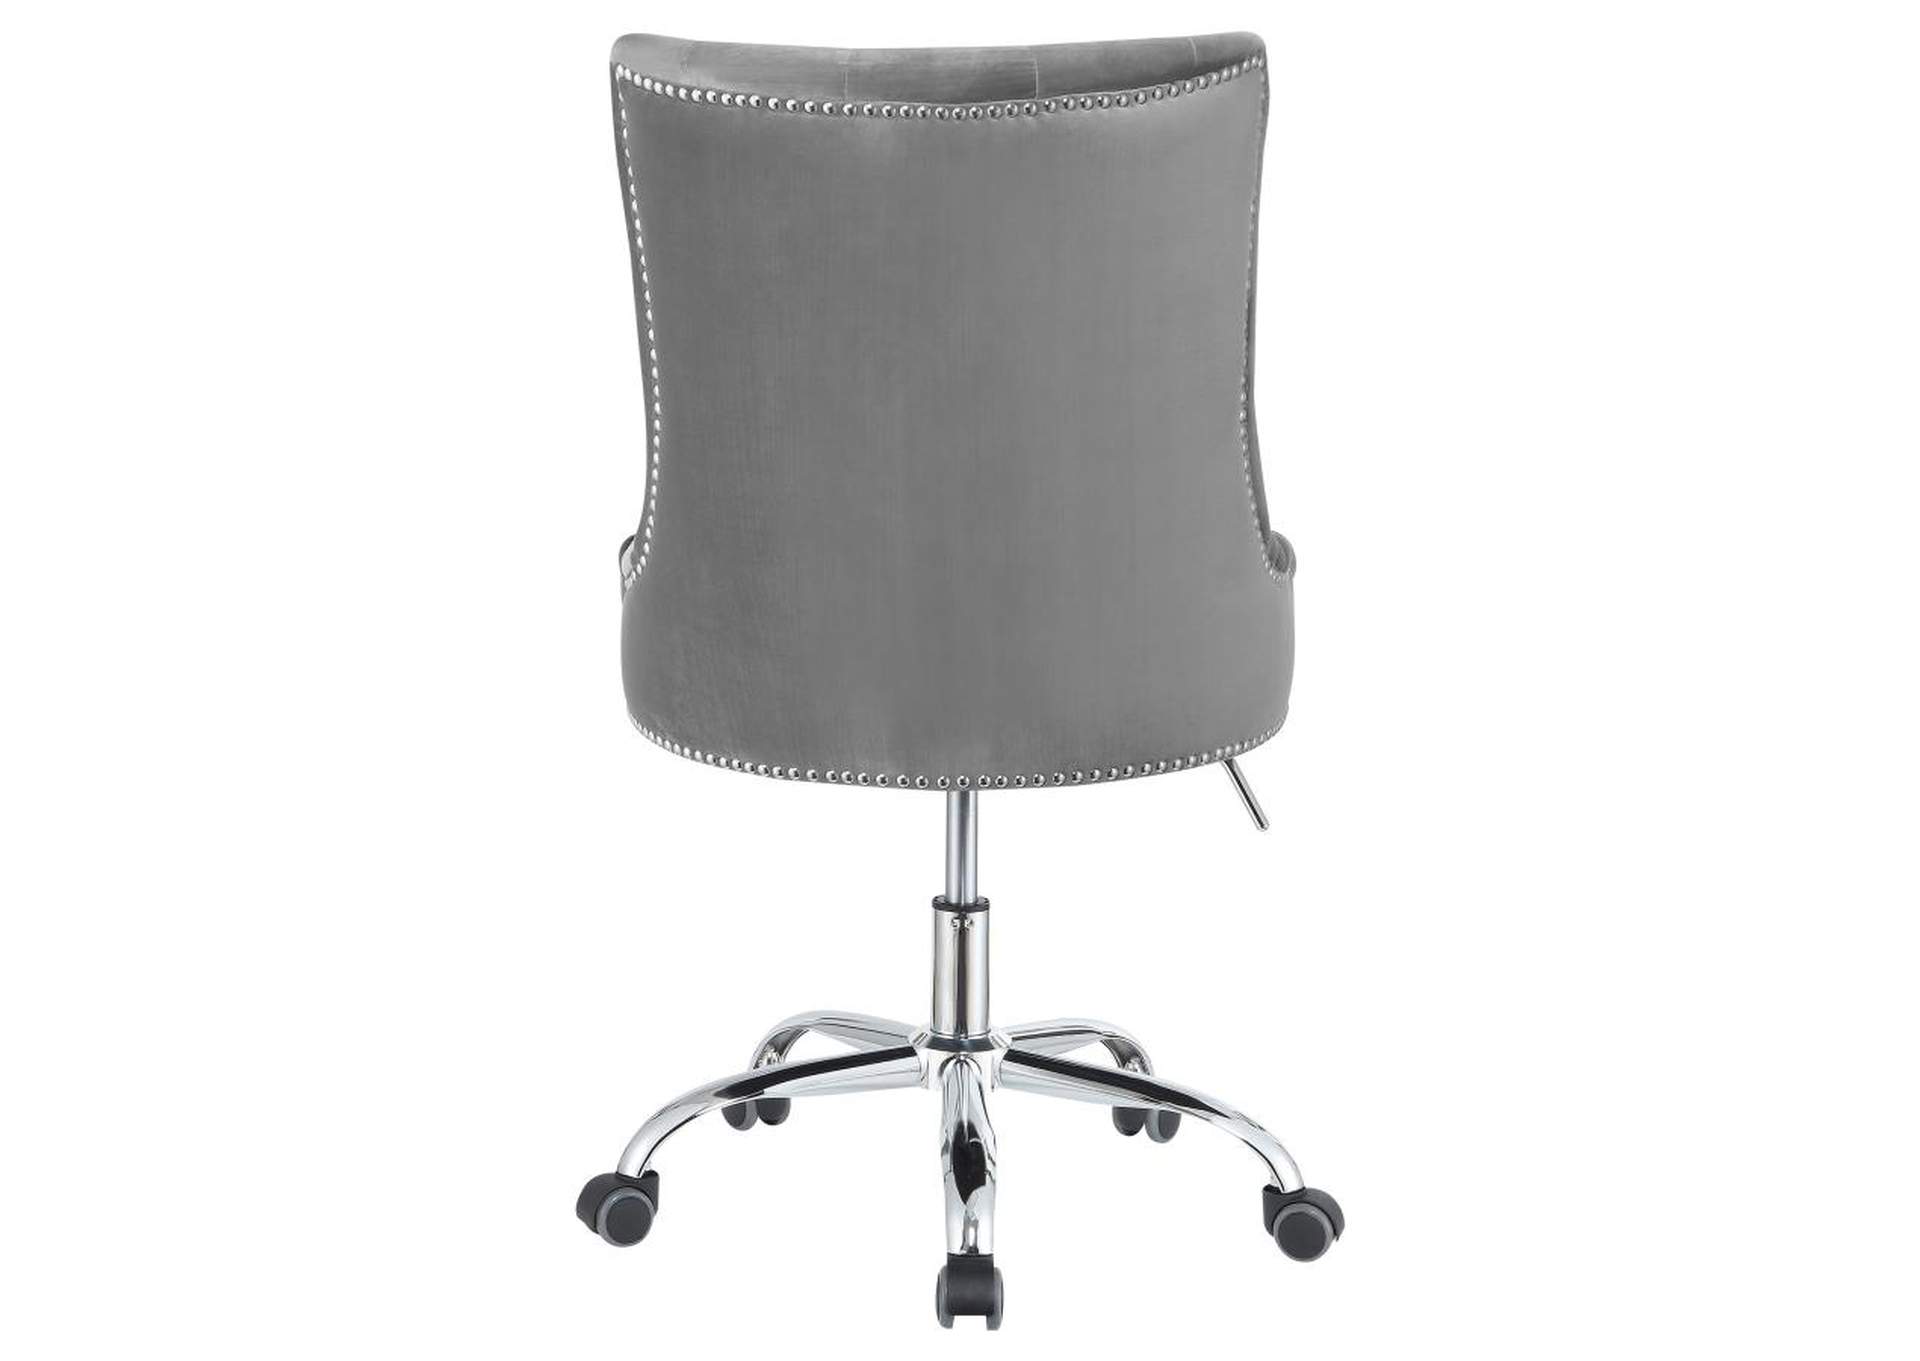 Torrance Tufted Back Office Chair Grey and Chrome,Coaster Furniture